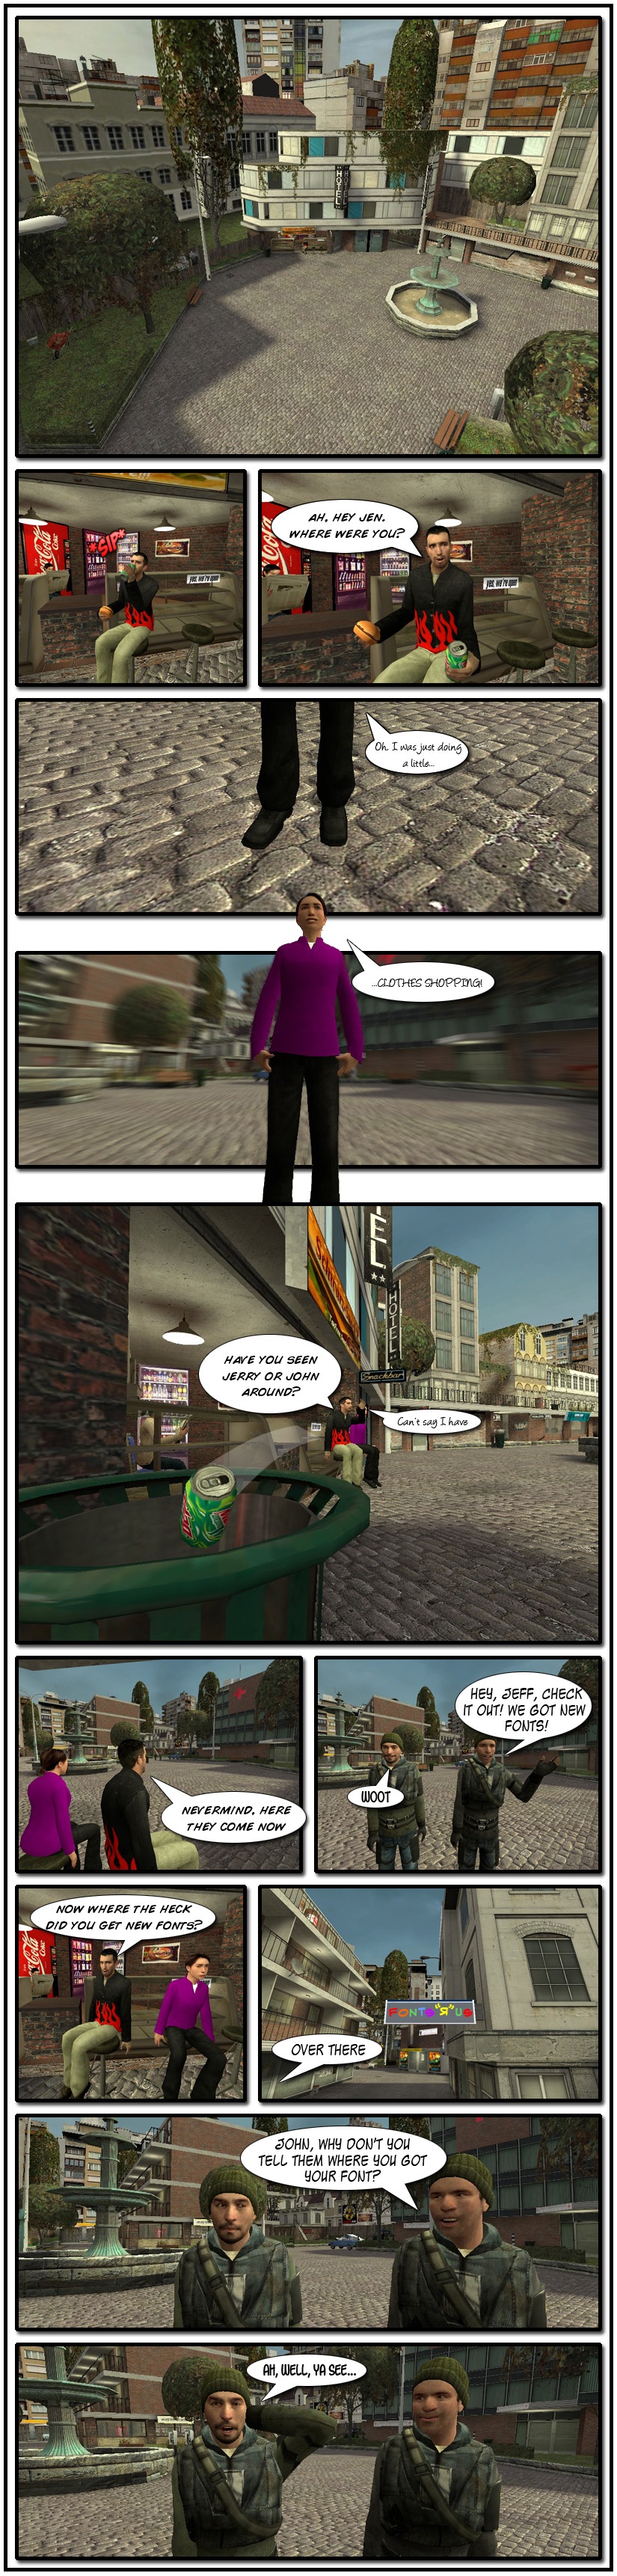 Jeff is drinking a soda in a café in downtown 1996. He notices Jen approaching and asks where she went. She tells him she went clothes shopping as she reveals new black pants and a purple sweater. Jeff tosses away a can into the trash as he asks Jennifer if she's seen John or Jerry around. Jeff then notices both approaching and Jerry tells them he and John got new fonts. Jeff asks where the heck they could have gotten new fonts and Jerry points at a nearby Fonts R Us. He then tells John with a smirk to tell Jeff and Jen where he got his new font. John looks awkward as he tries to explain.